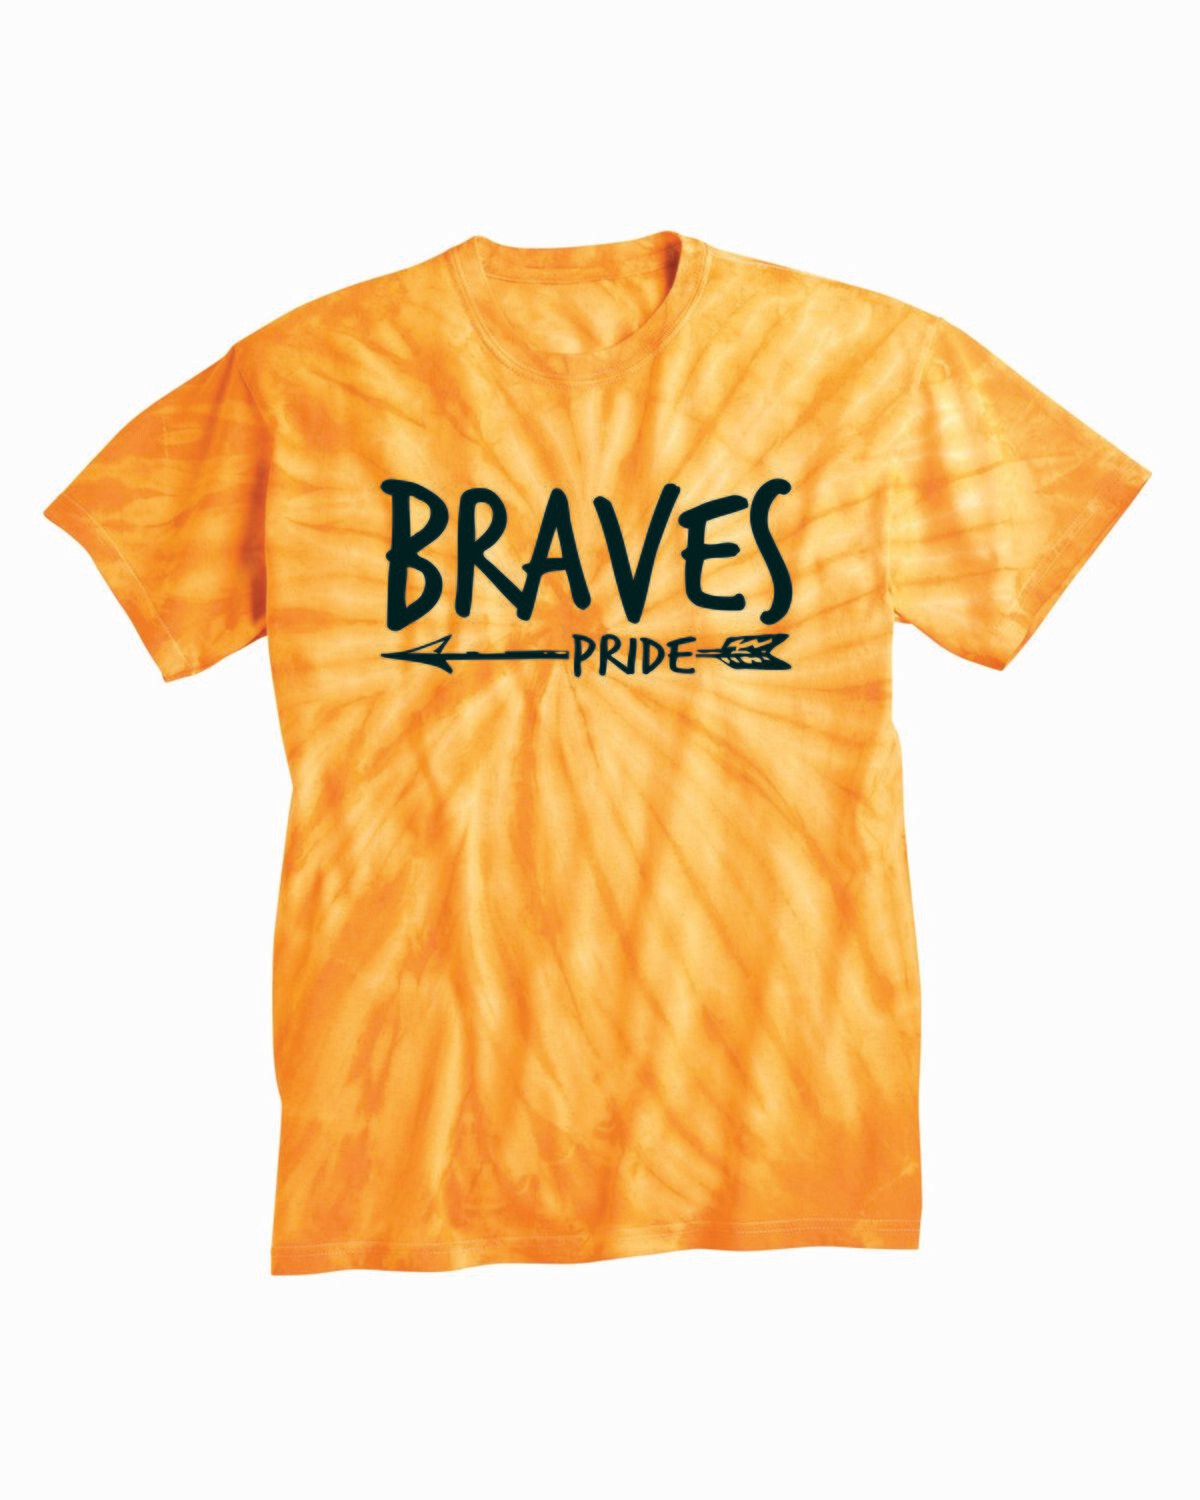 BRAVES PRIDE Tie Dyed T-shirt, Gold